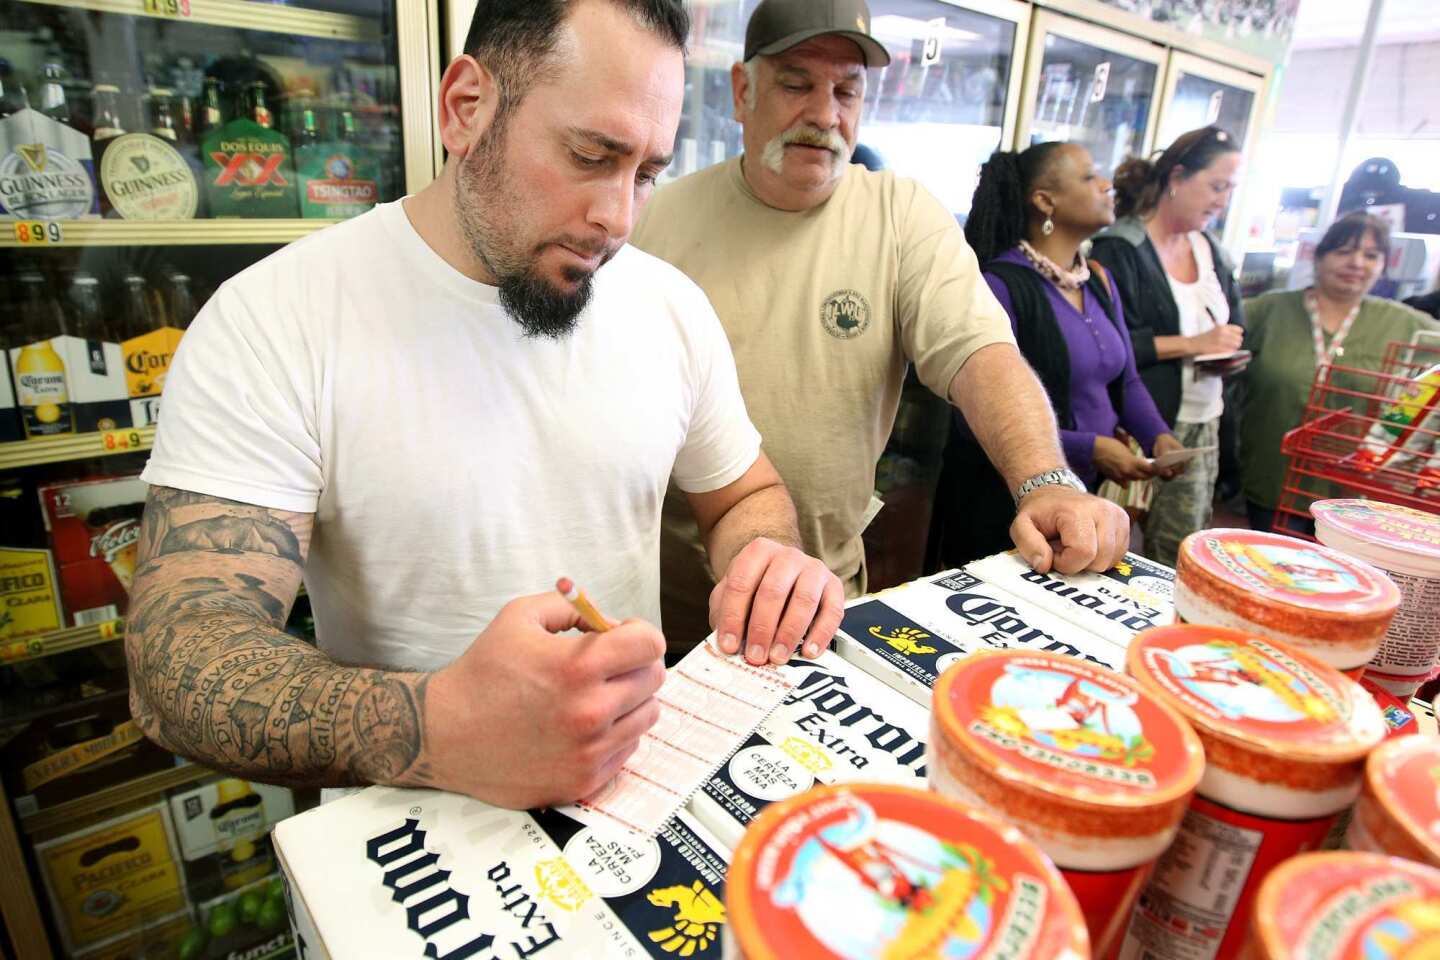 Josh DiLeva, left, picks numbers as Matte Jurevich, second from left, looks on while waiting in line to play the lottery at Mr. C's Liquor in San Pedro.